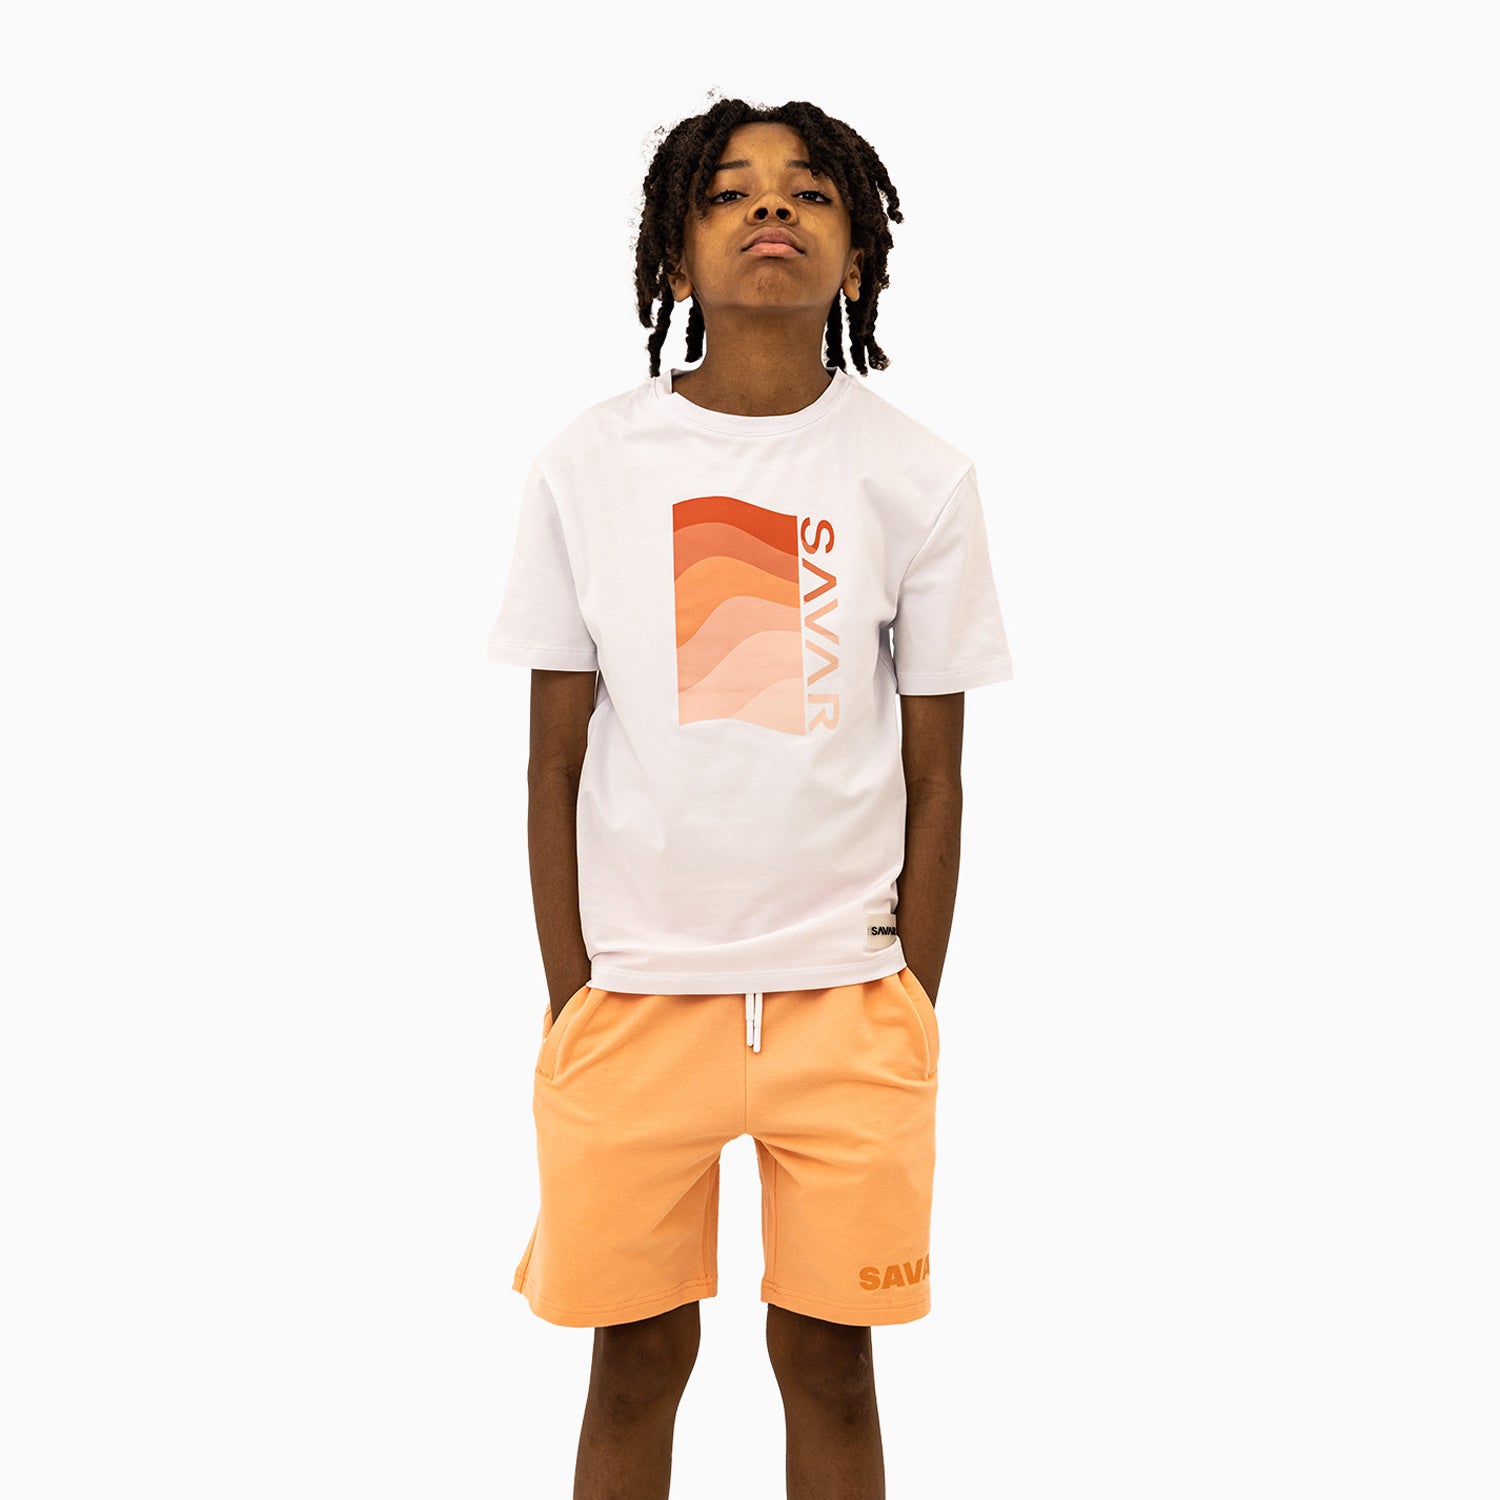 kids-savar-t-shirt-and-shorts-outfit-stb4036-116-ssb4036-116